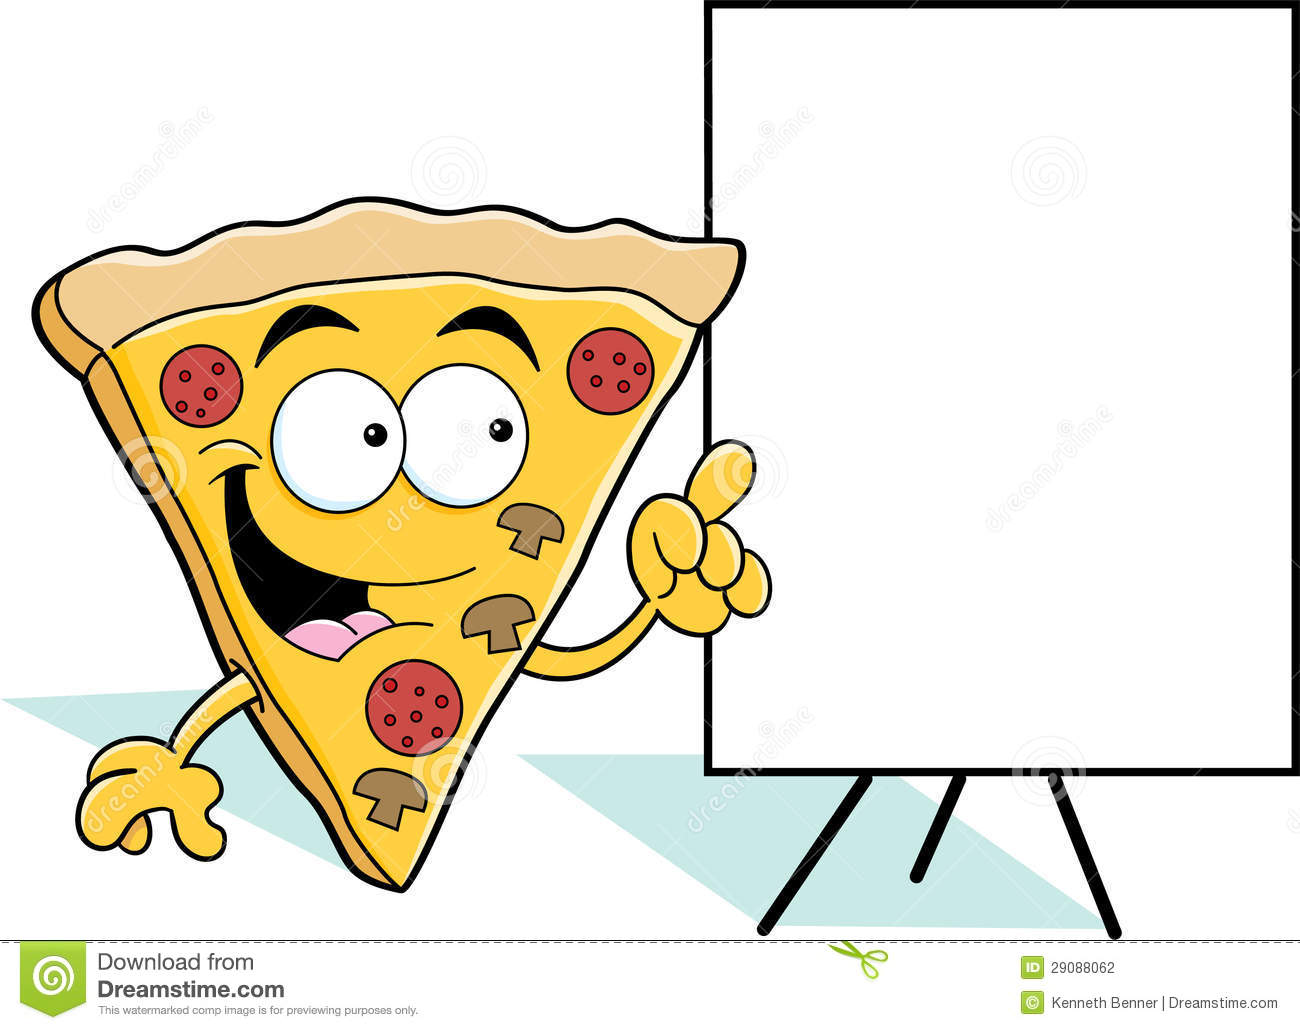 There Is 33 Funny Pizza Free Cliparts All Used For Free